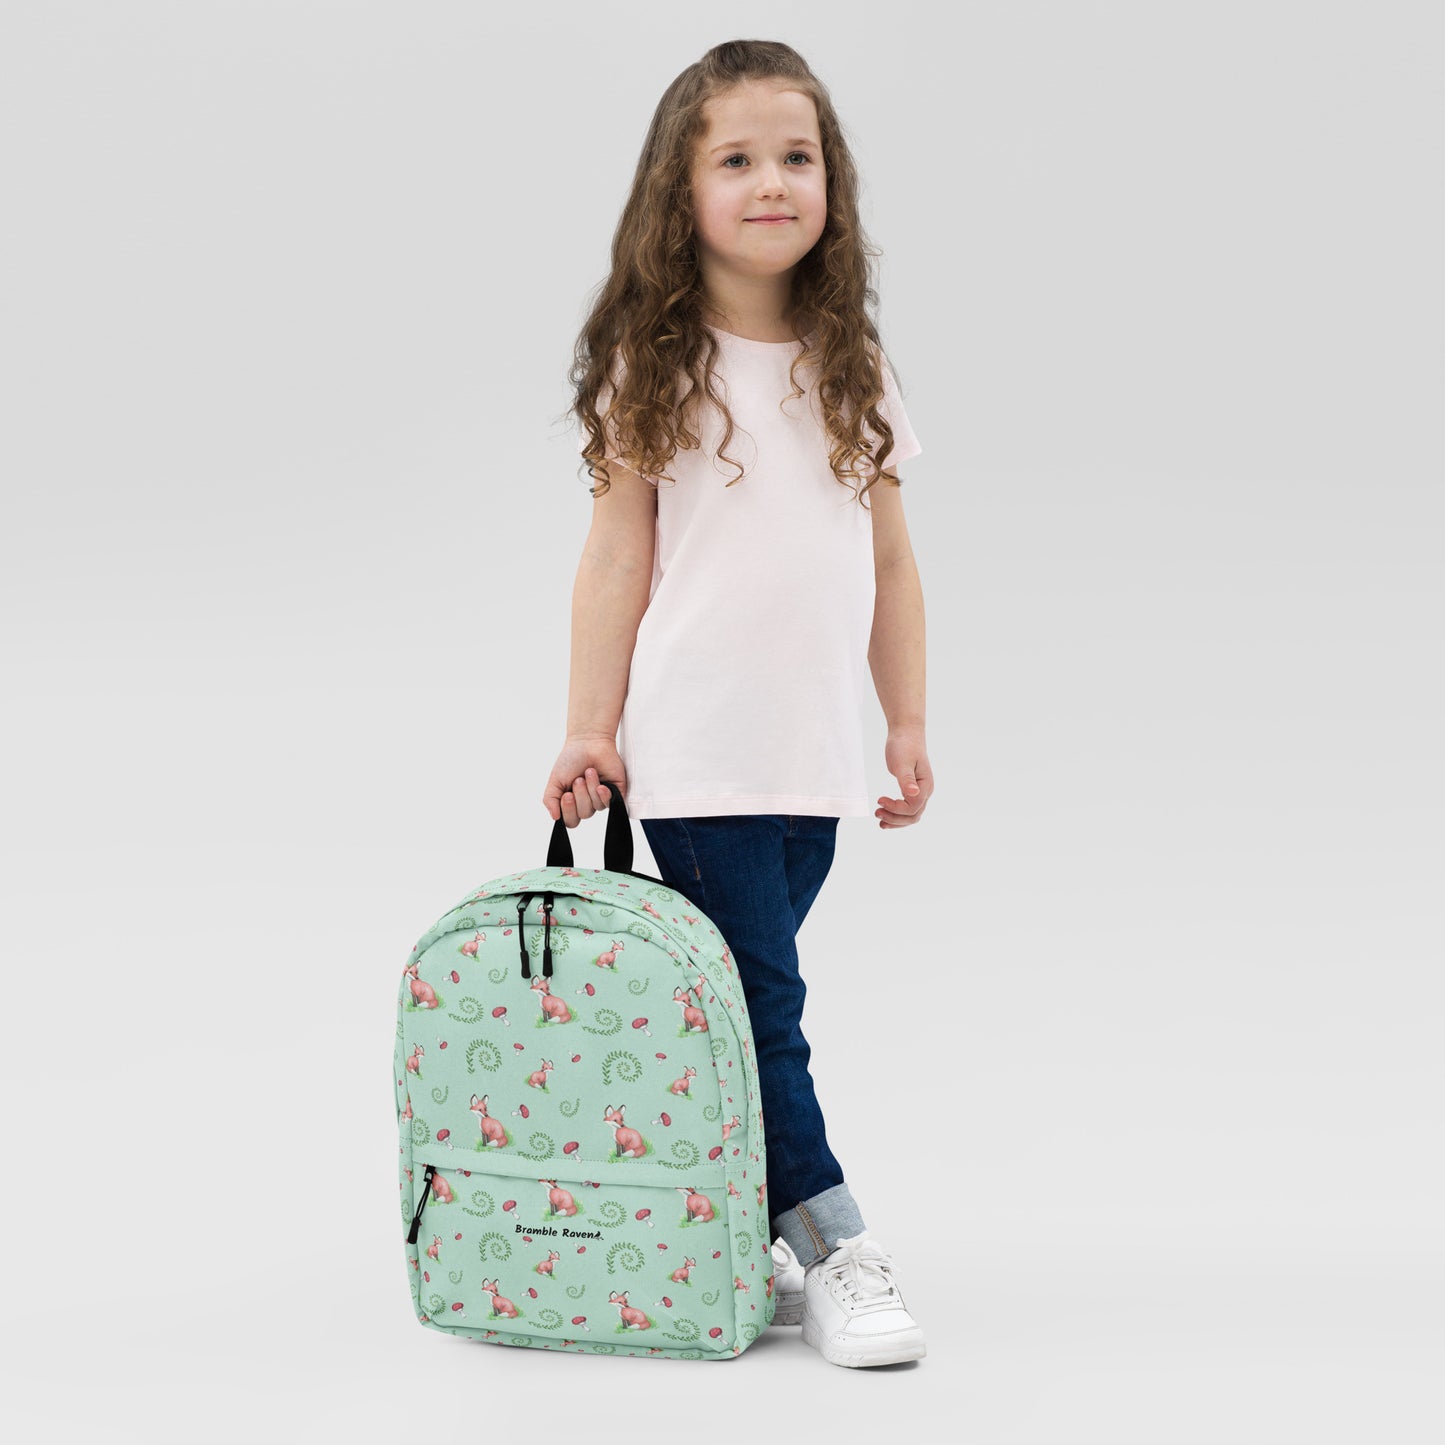 Forest fox backpack. Has watercolor foxes, mushrooms and ferns on a light green water-resistant polyester fabric. Includes an inner pocket that can hold a 15 inch laptop. Has a hidden pocket with zipper on the back, and ergonomic straps. Shown being held by a girl.